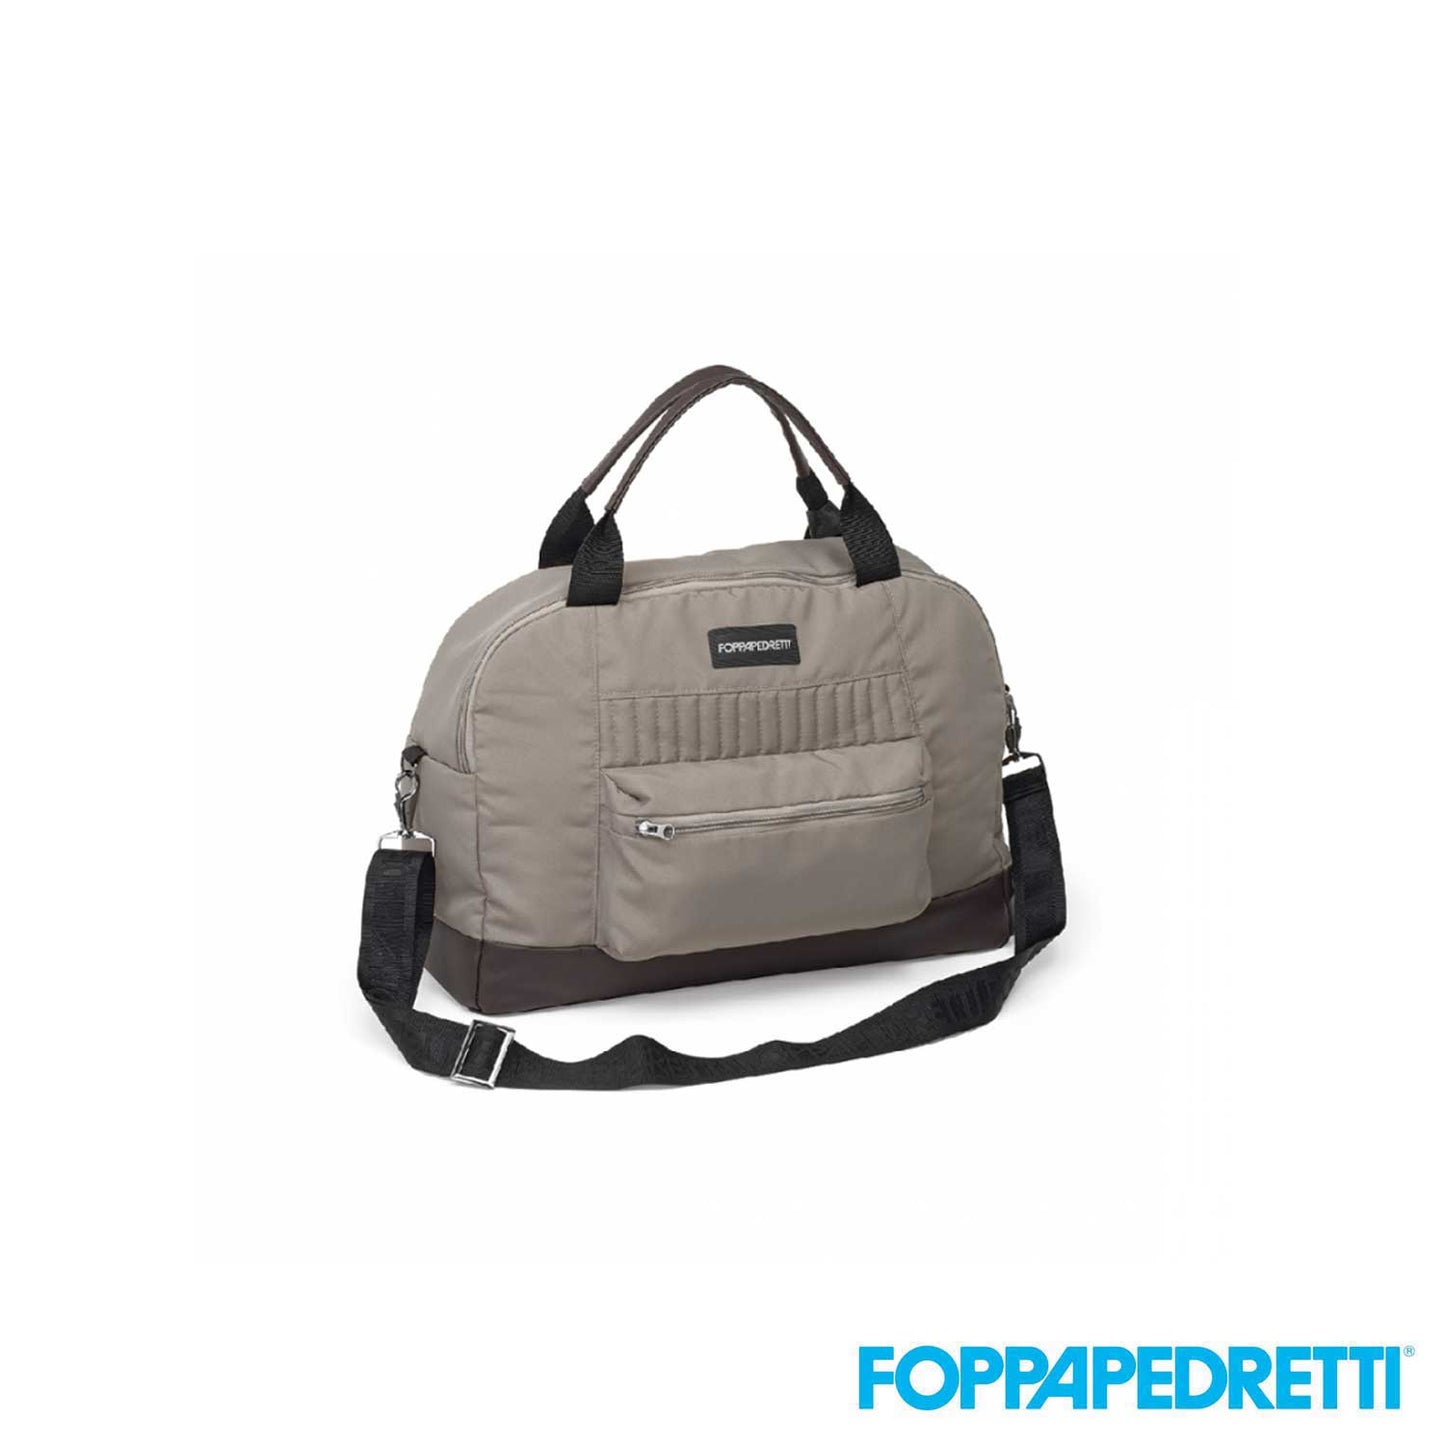 Foppapedretti - Comfort bag with changing mat